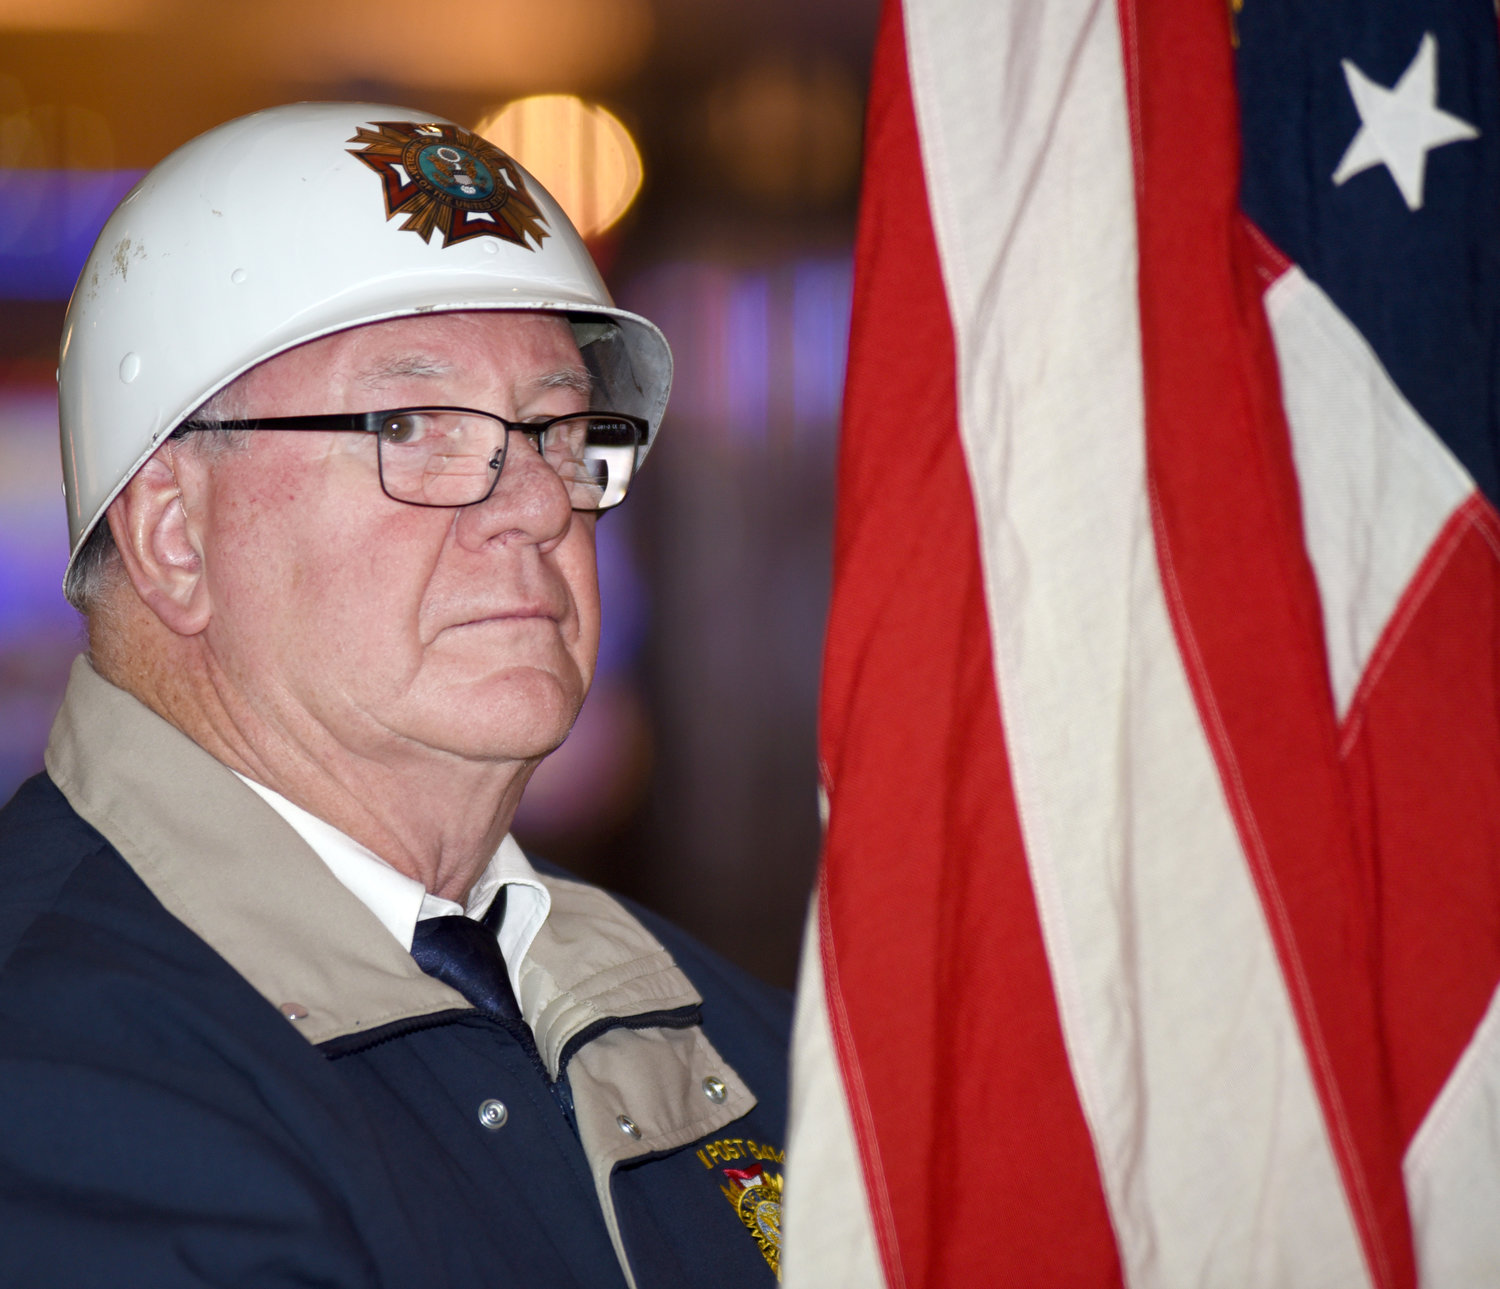 Ed Mattes from the Riverside VFW Post No. 6414 holds the American flag during Veterans Day ceremonies at the Riverside Casino on Monday. The ceremony moved inside due to the snow and cold. The indoors ceremony concluded with the playing of Lee Greenwood’s “I am Proud to be an American.” Several of the veterans in the audience stood and saluted during the song. The slot machines in the casino fell silent as casino customers moved toward the ceremony in the casino’s entrance, some wiping away tears as the song played.